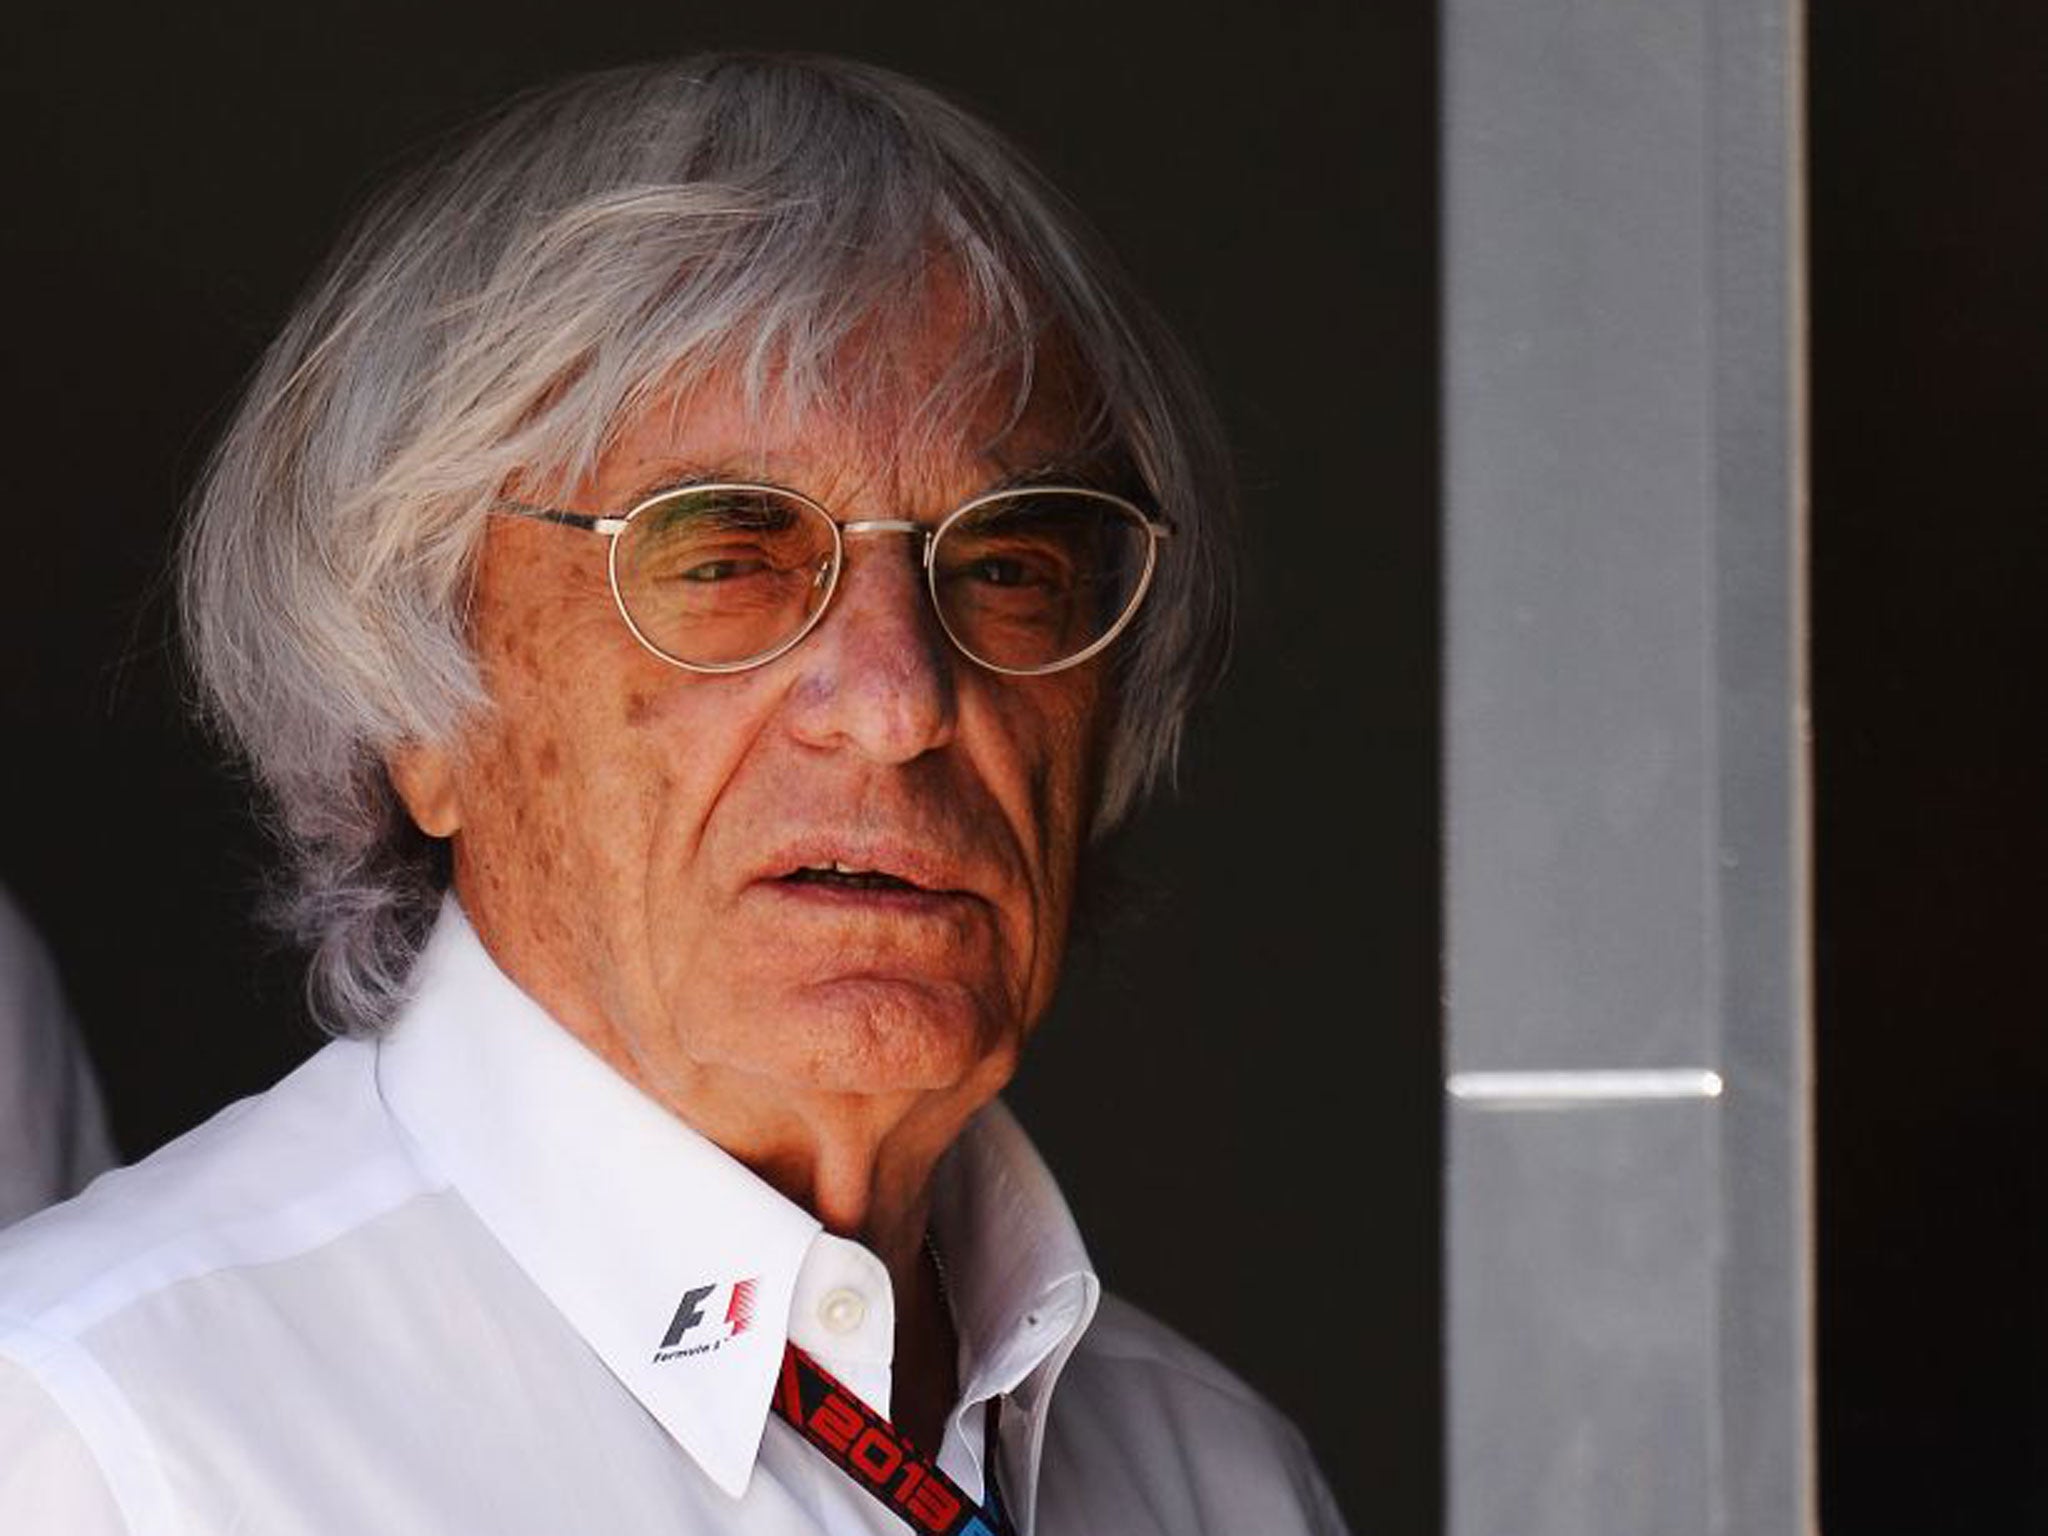 Bernie Ecclestone has denied paying a German banker to influence the F1 sale, which is at the heart of the civil case which starts today